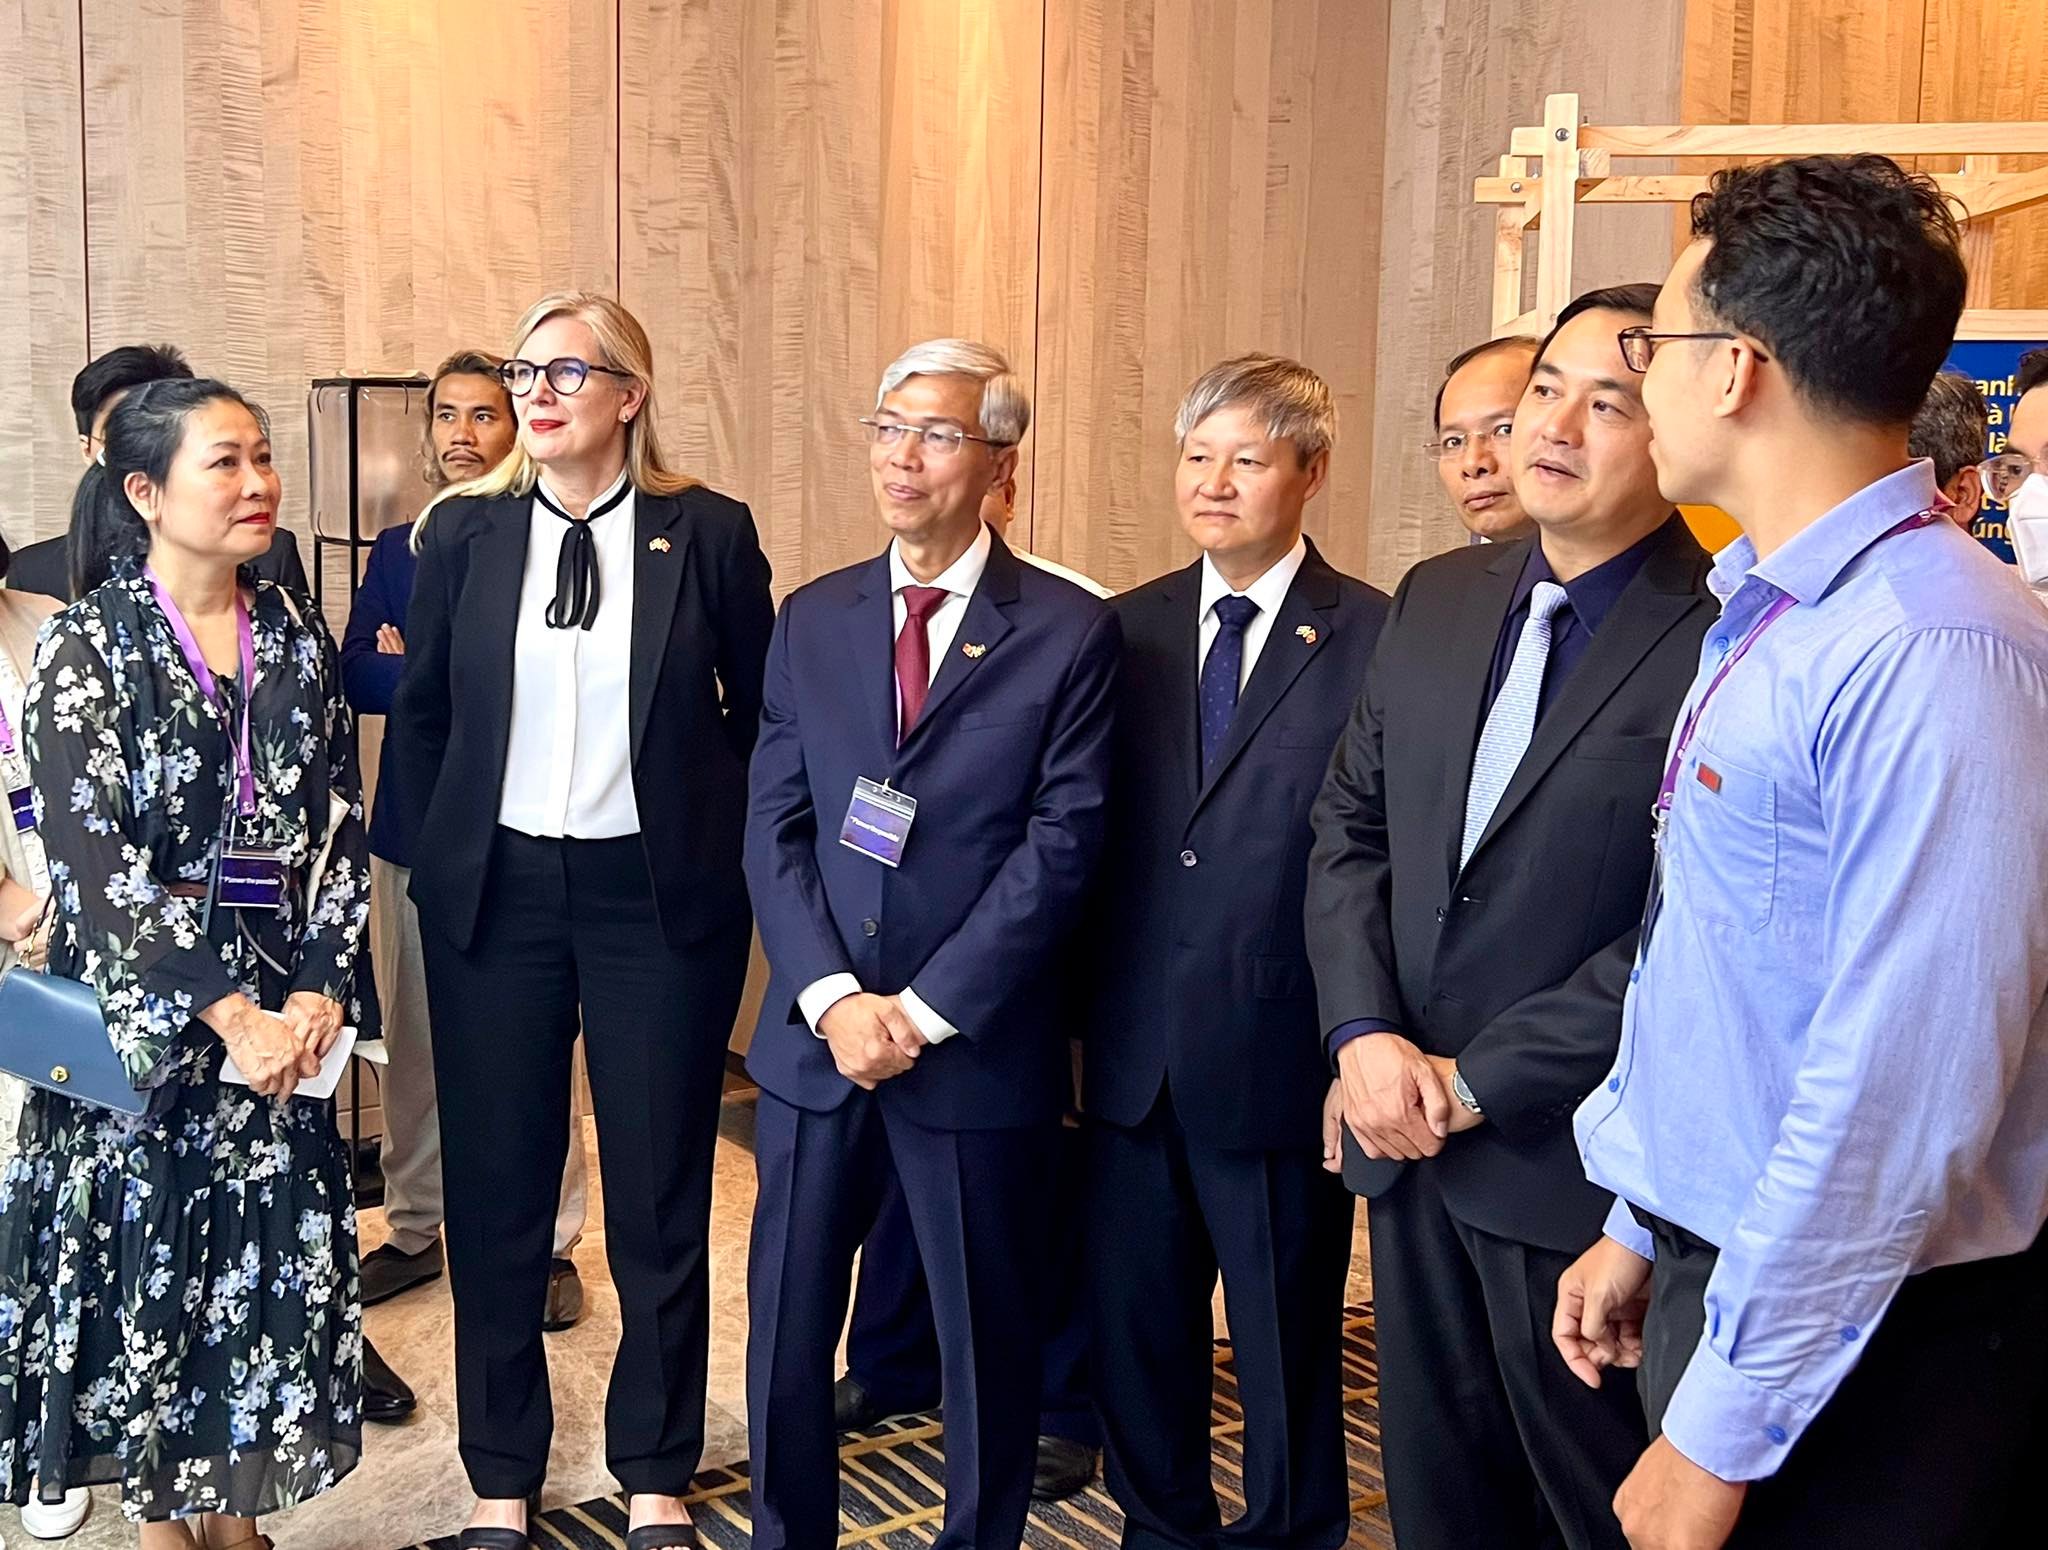 Swedish Ambassador to Vietnam Ann Måwe and vice-chairman of the Ho Chi Minh City People's Committee Vo Van Hoan talk with a business at the 'Pioneer the Possible' Exhibition in Ho Chi Minh City, June 2, 2022. Photo: Duy Khang / Tuoi Tre